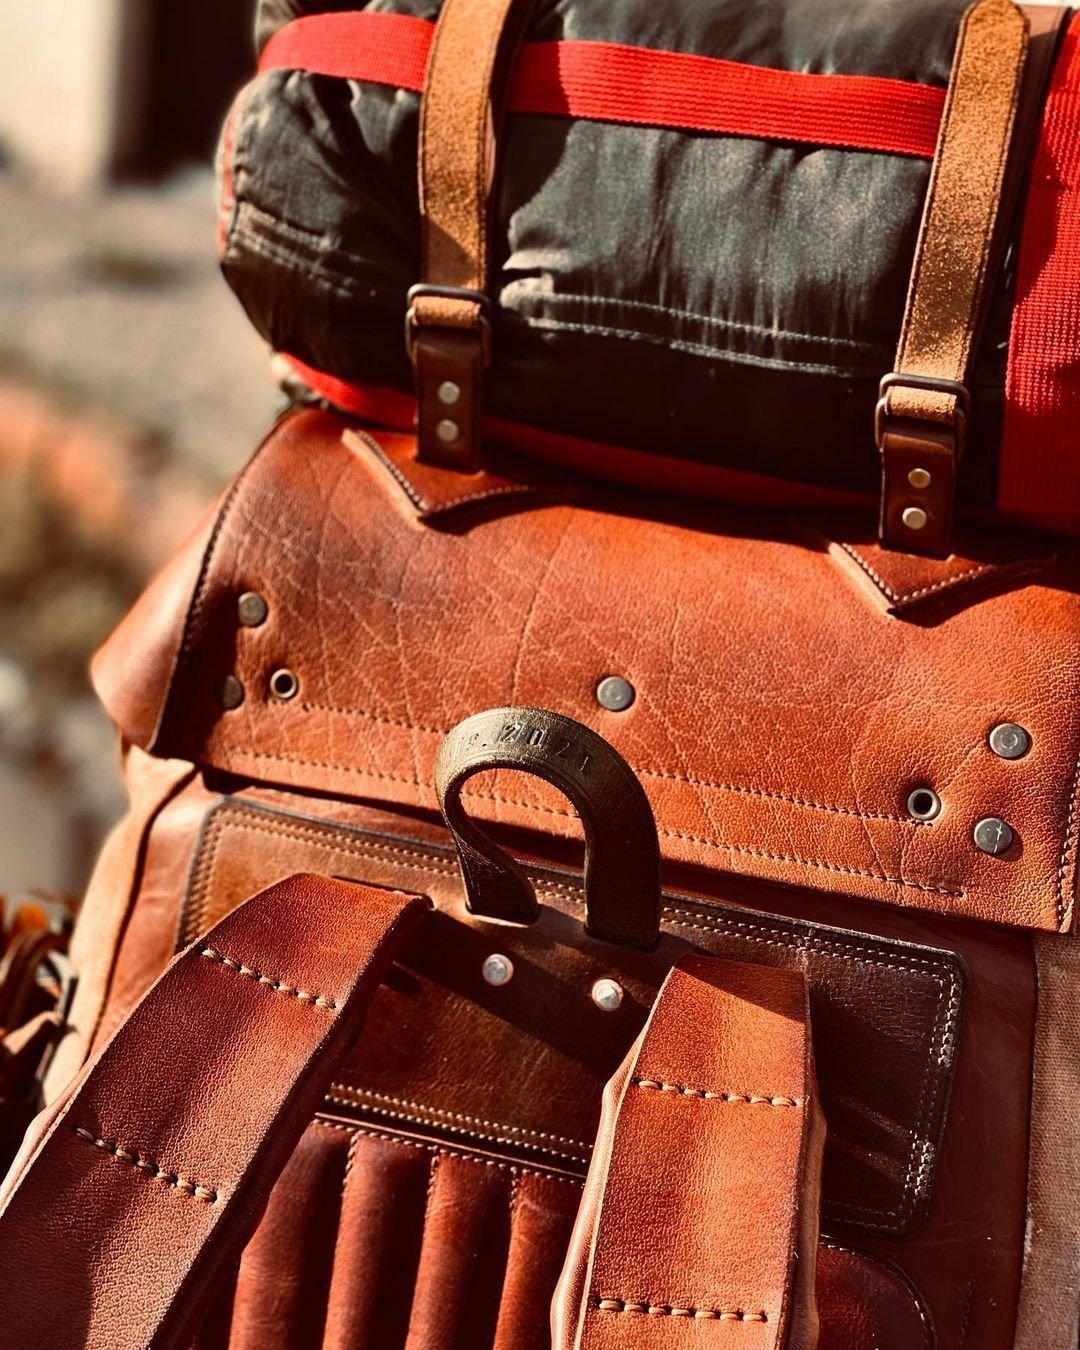 For Shane | Handmade Leather, Waxed Backpack for Travel, Camping, Hunting, Bushcraft, Hiking | 45 Liter | Survival | Personalization bushcraft - camping - hiking backpack 99percenthandmade   